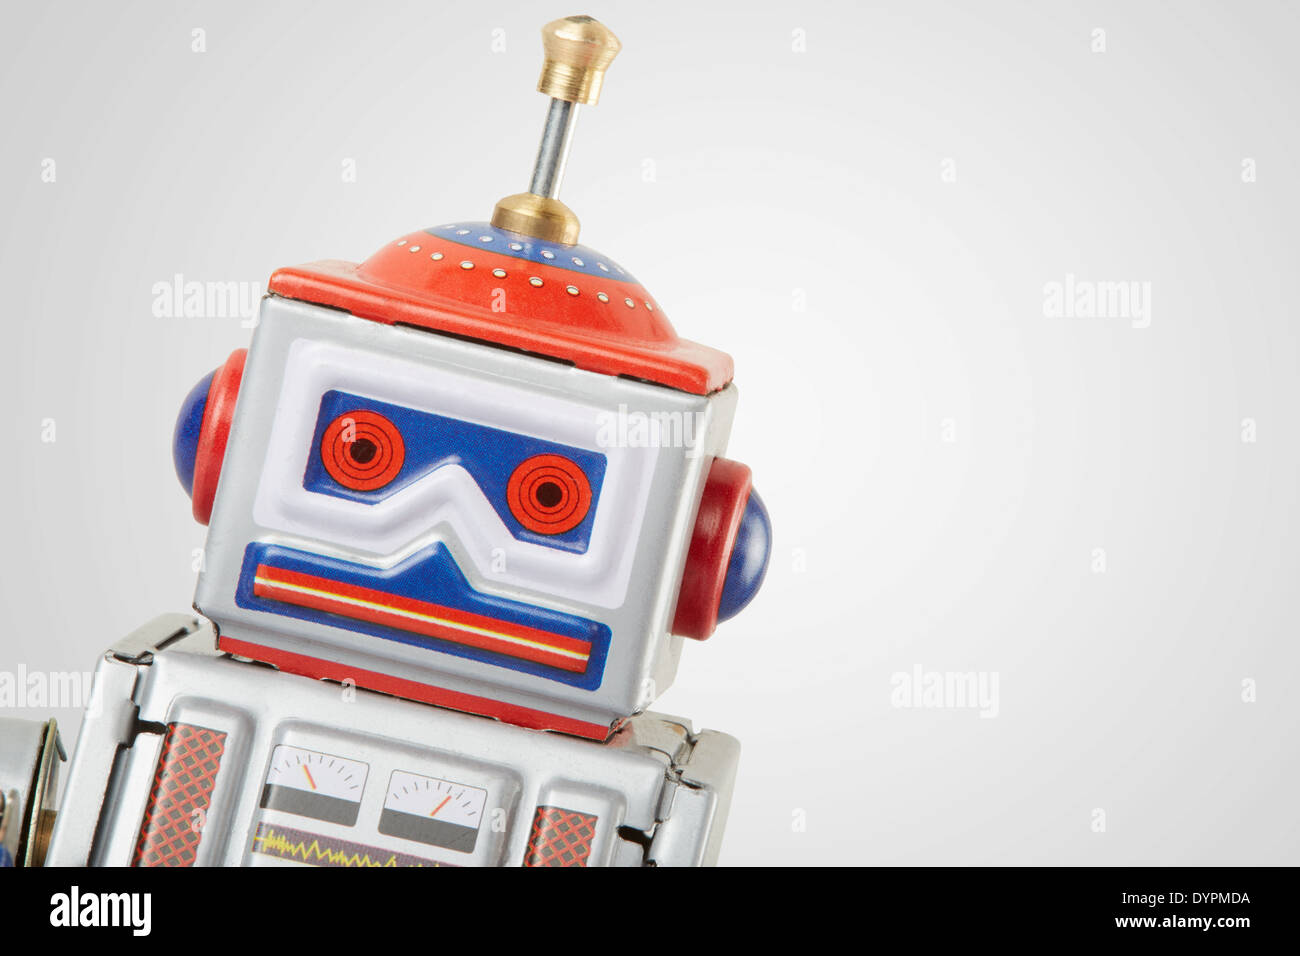 Robot vintage toy close up Stock Photo